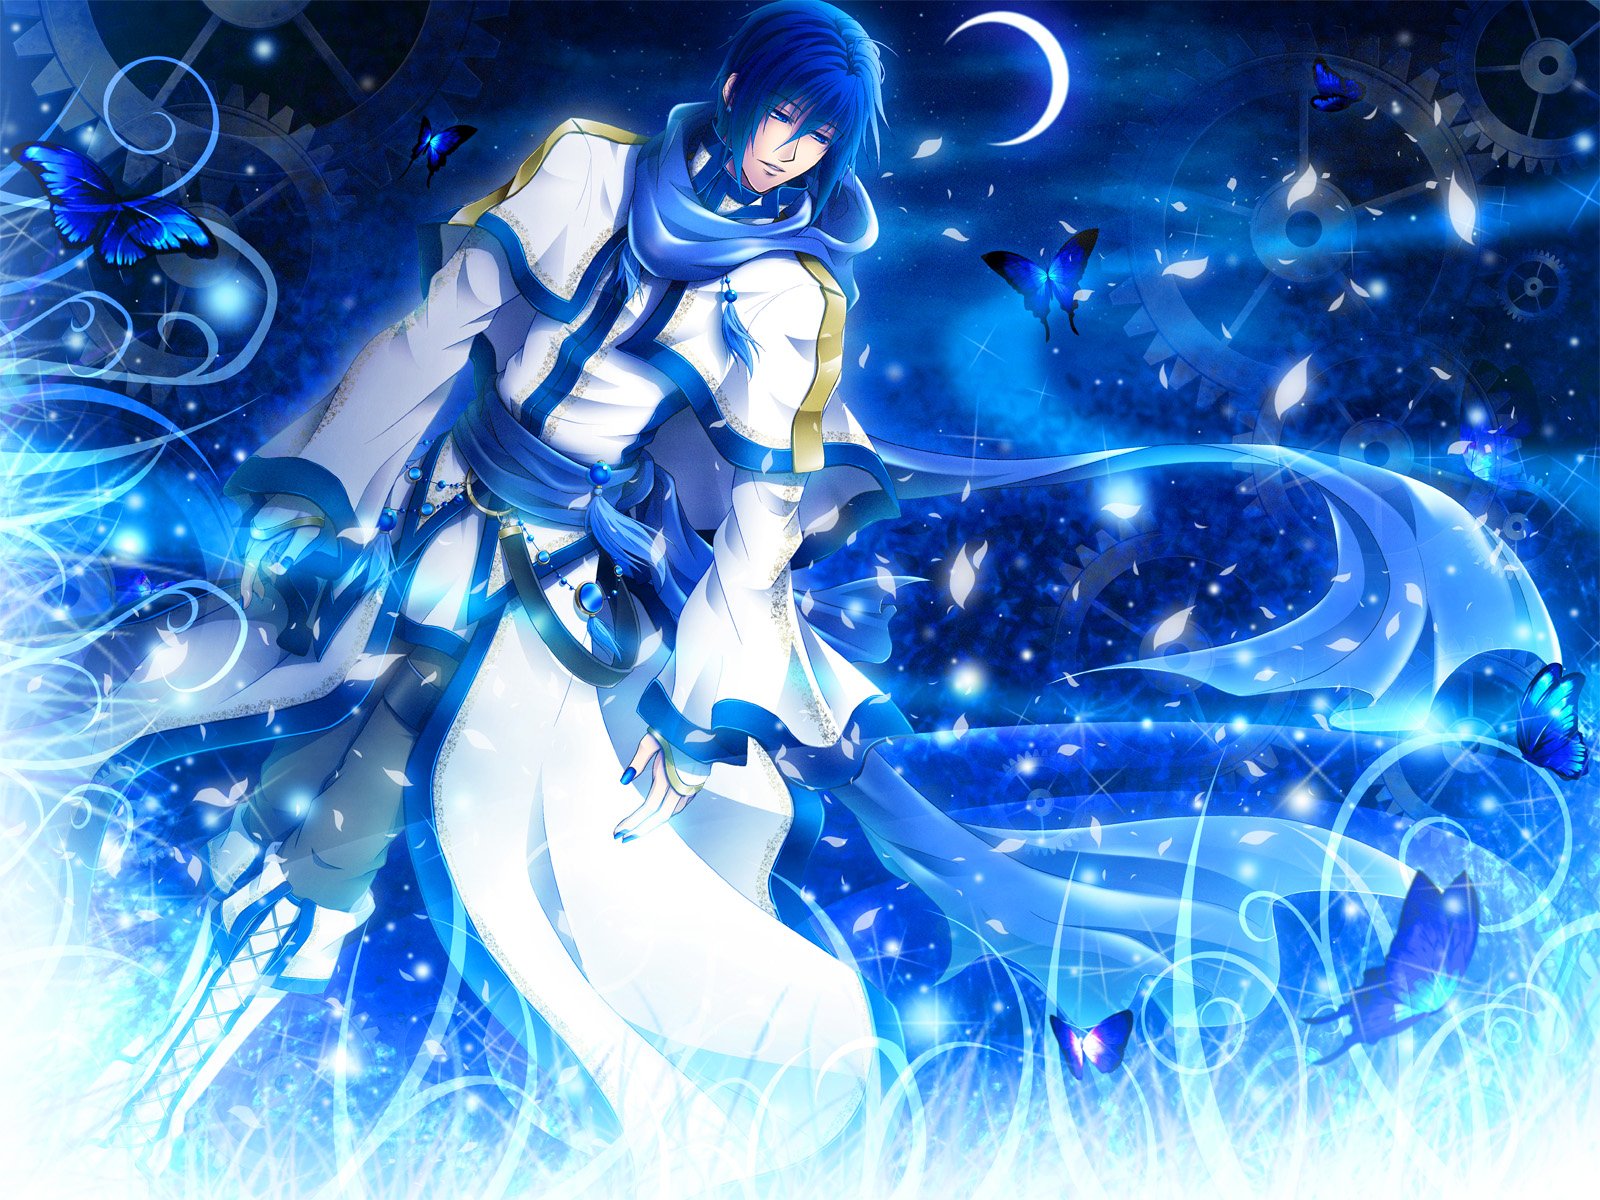 Wallpaper ID 483445  Anime Vocaloid Phone Wallpaper Kaito Vocaloid  720x1280 free download